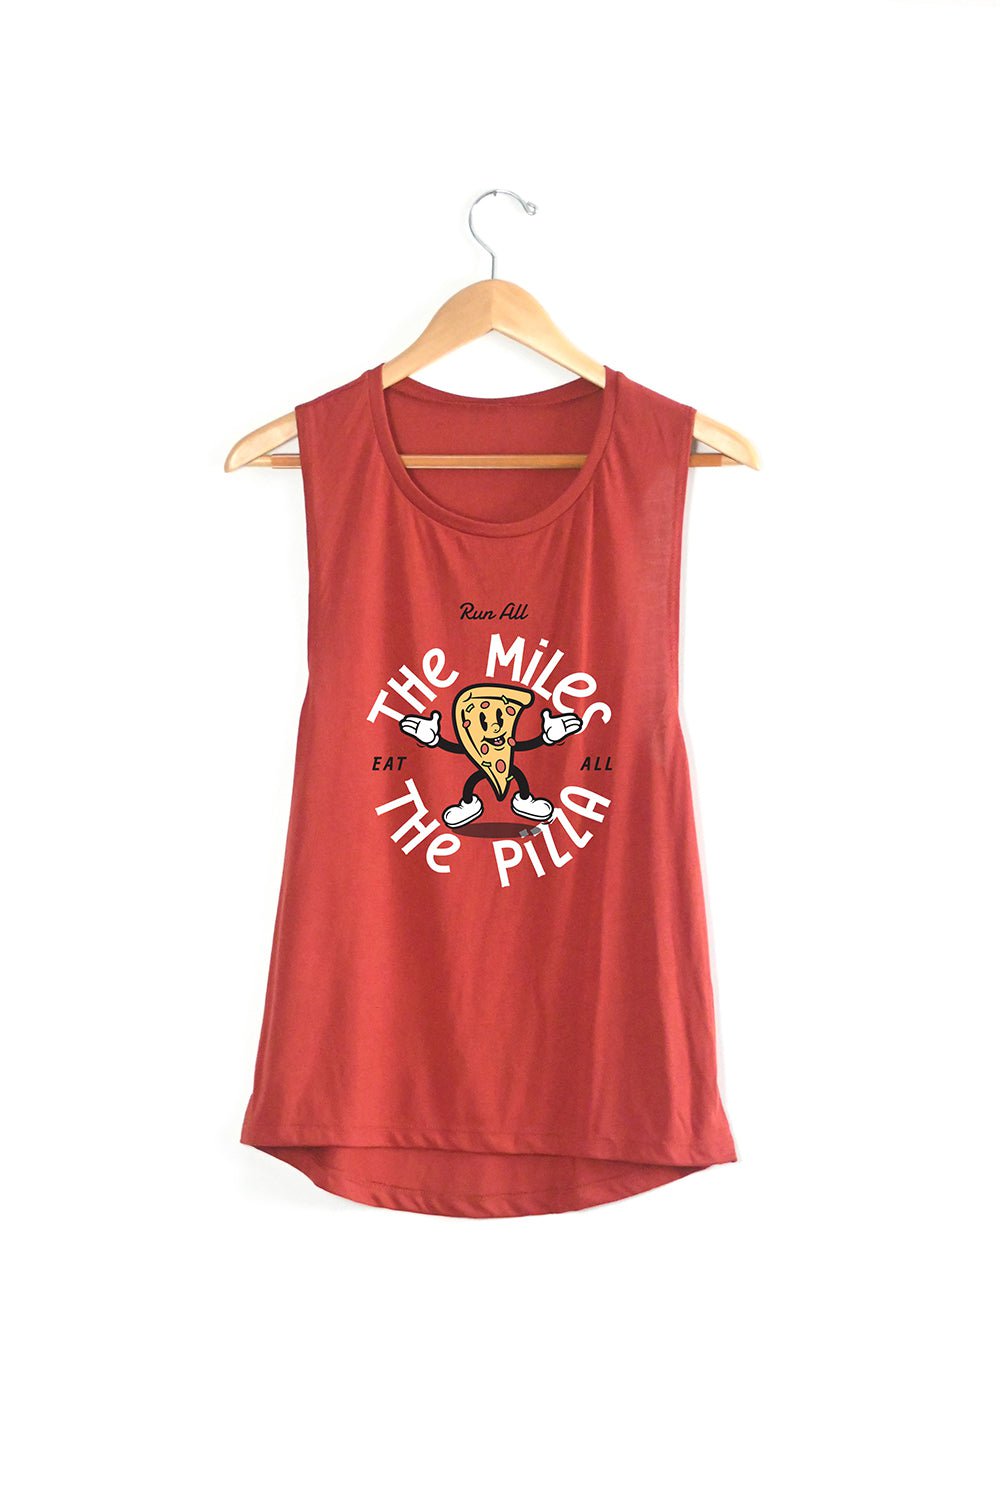 Sarah Marie Design Studio Small / Brick Run All The Miles, Eat All The Pizza Muscle Tank